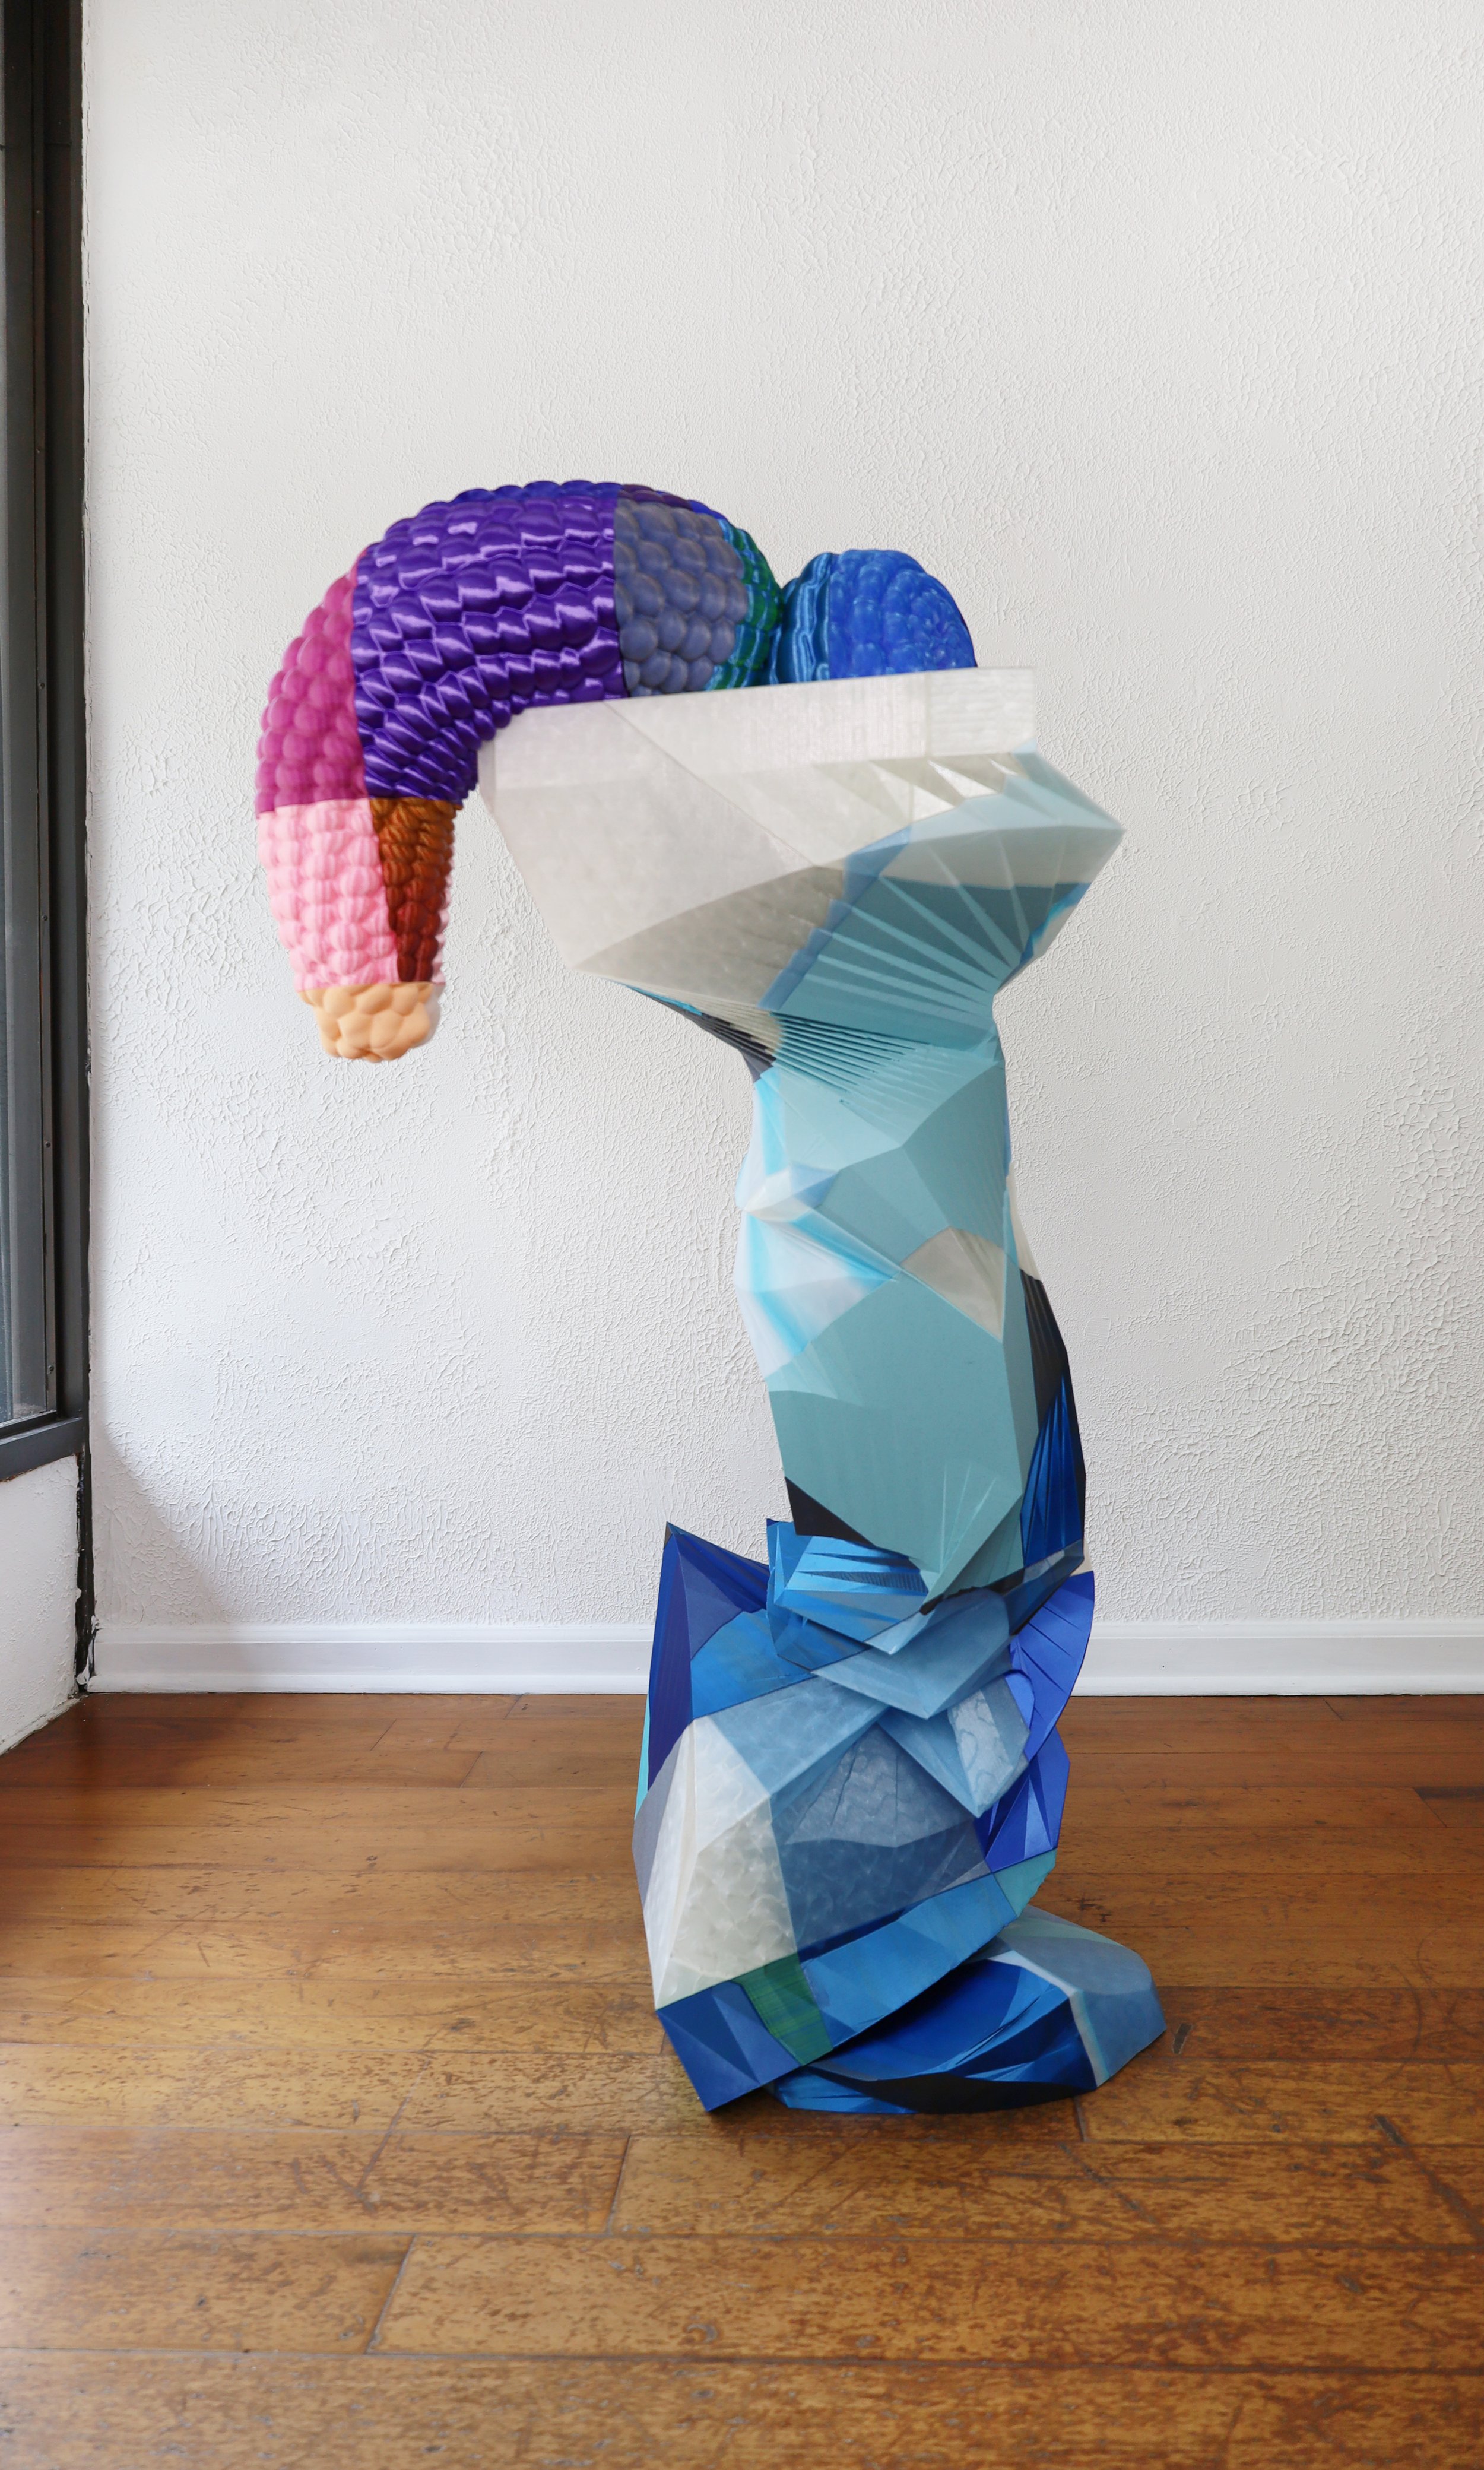  Gracelee Lawrence,  Pain Avoidance Technology , 2022, 3D printed PLA plastic, 47 x 22 x 18 inches 